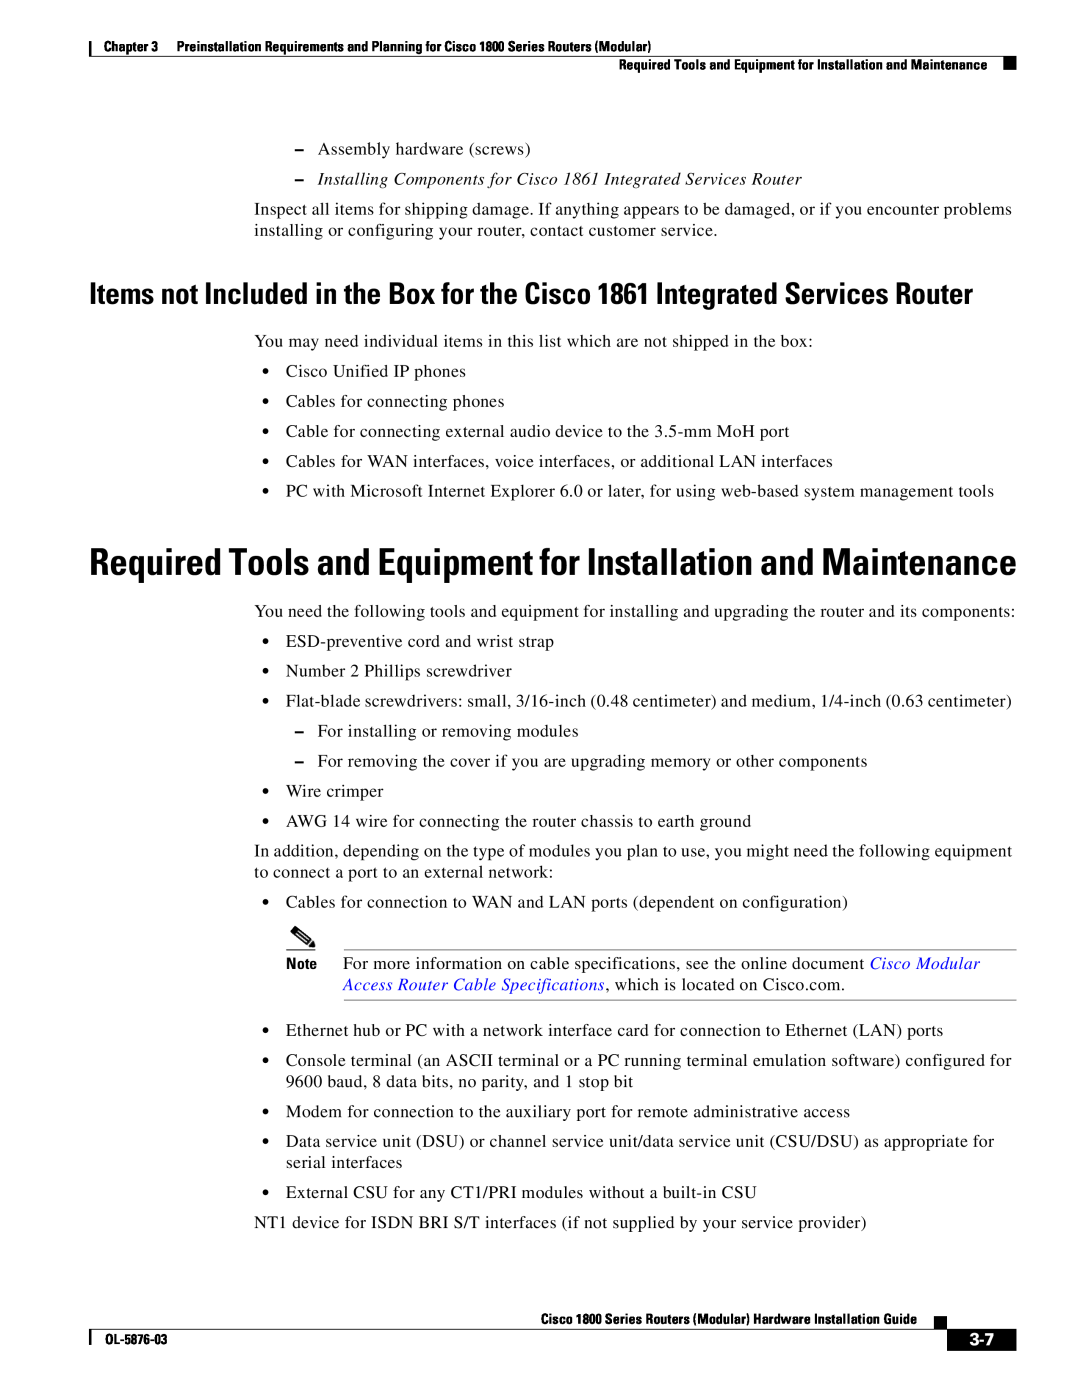 Cisco Systems CISCO1841-HSEC/K9-RF manual Required Tools and Equipment for Installation and Maintenance 